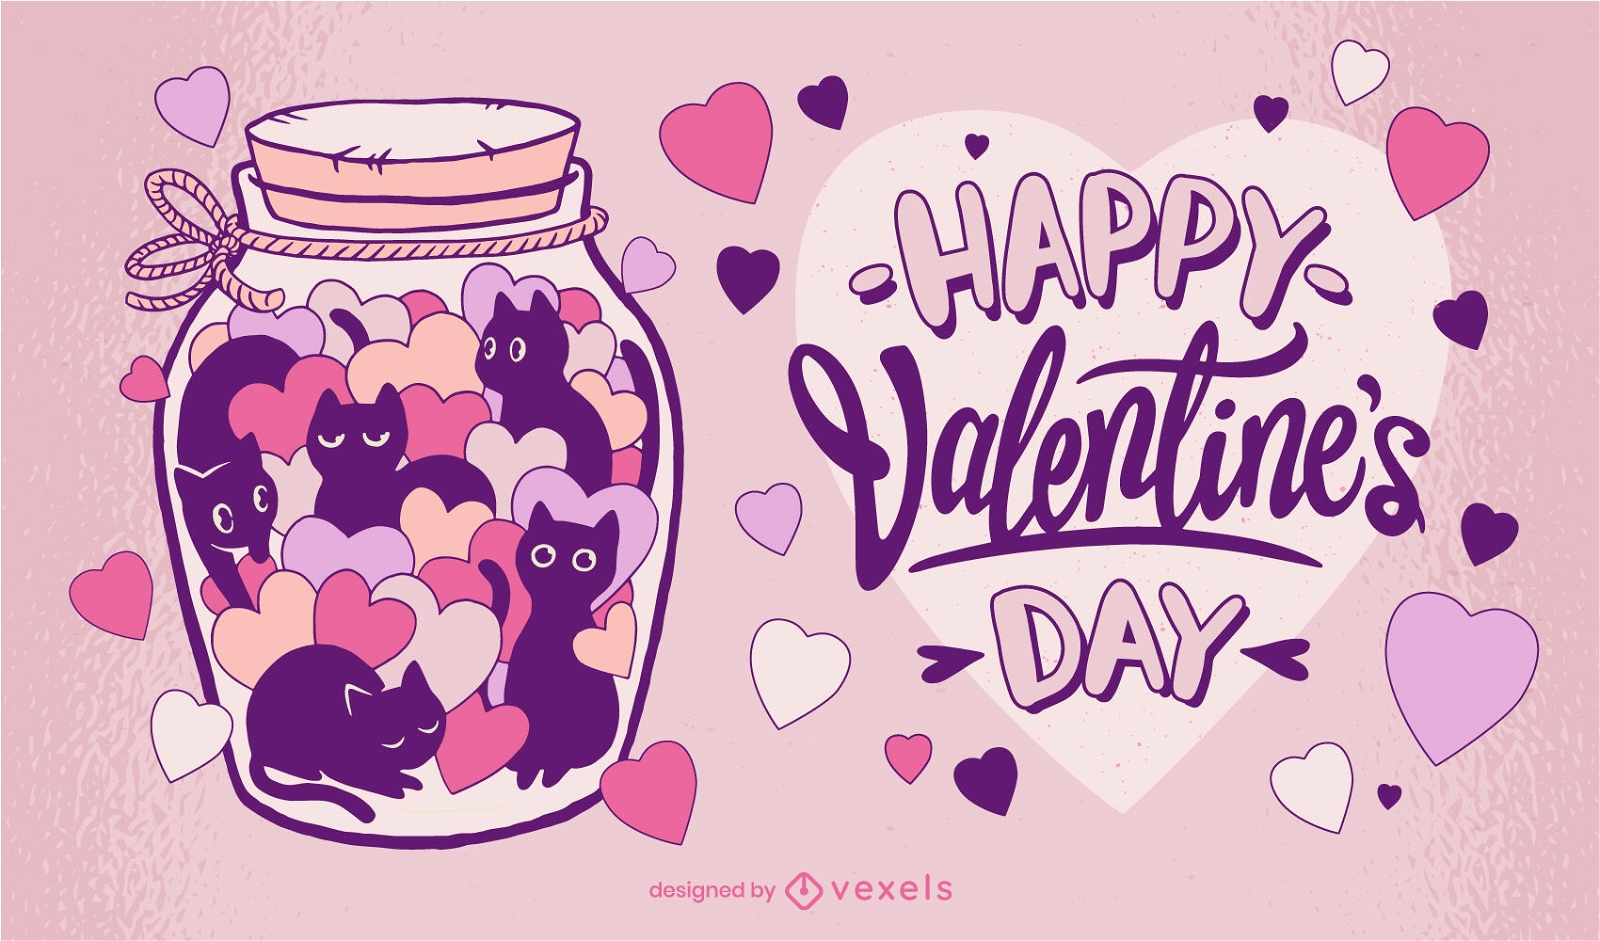 Valentines day heart jar with cats illustration